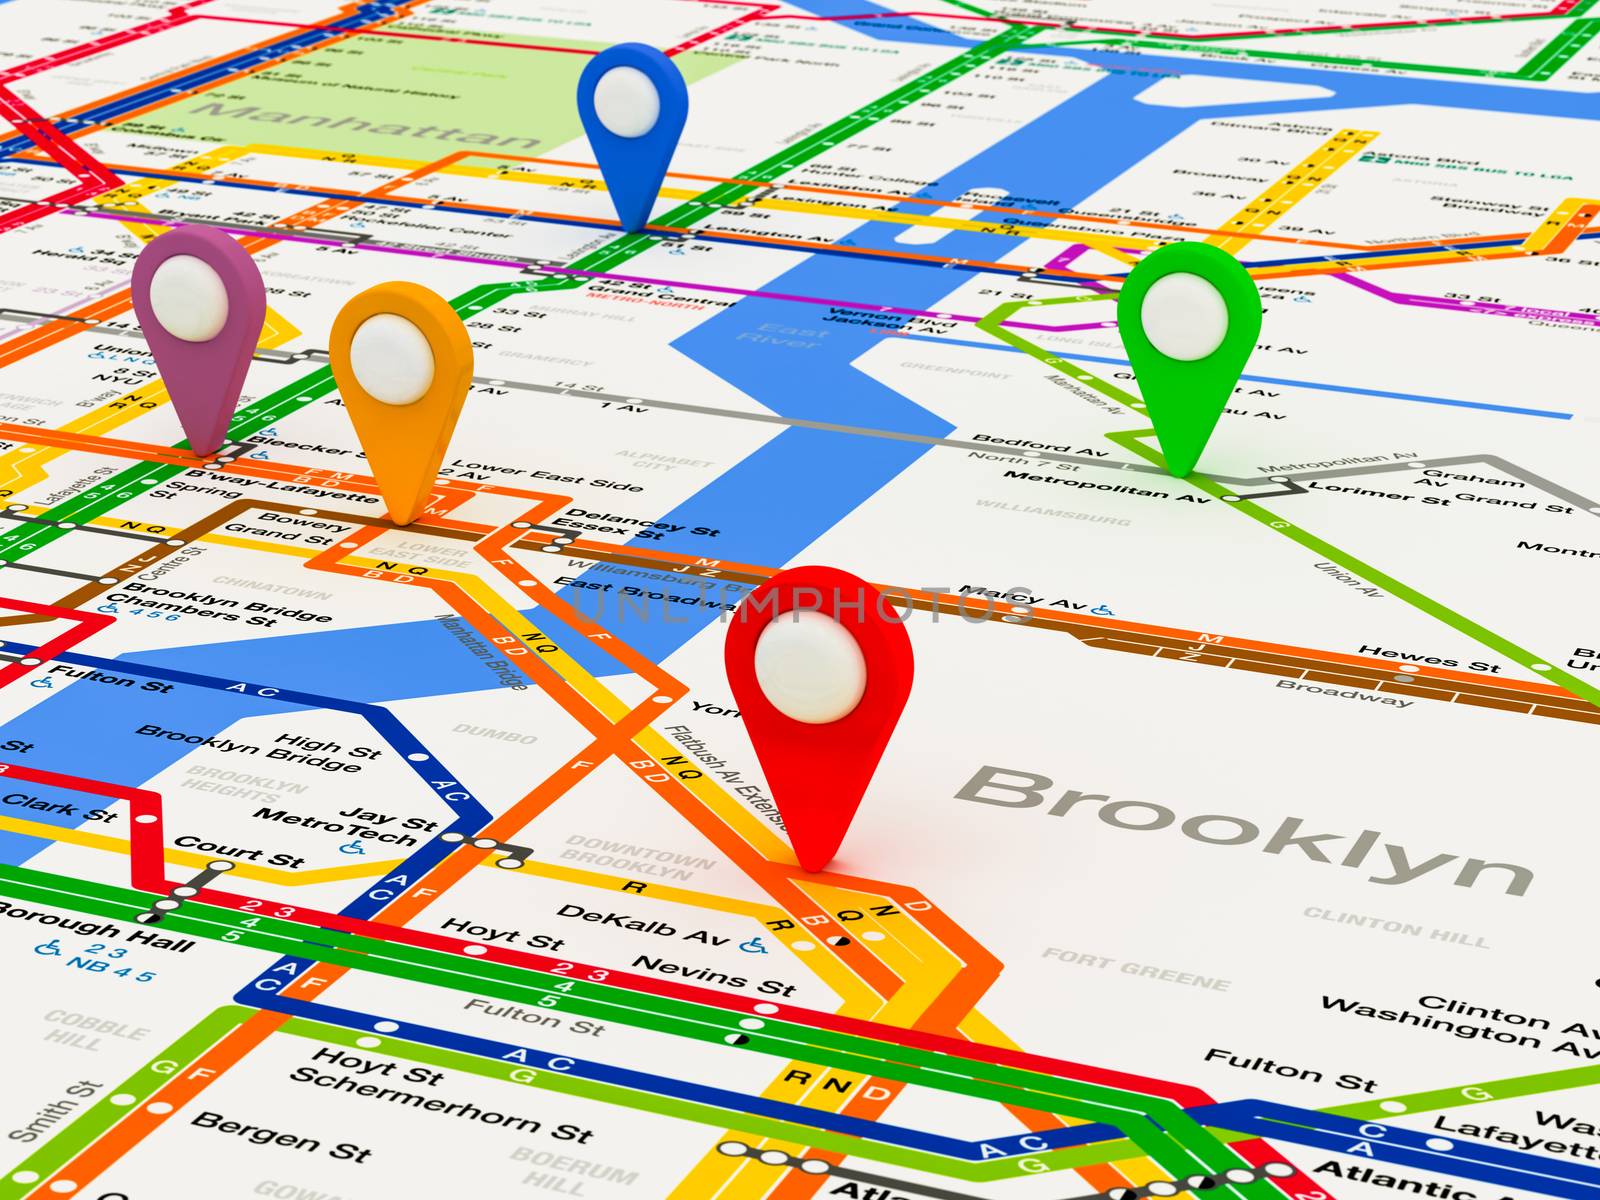 New York navigation subway map with colored pin